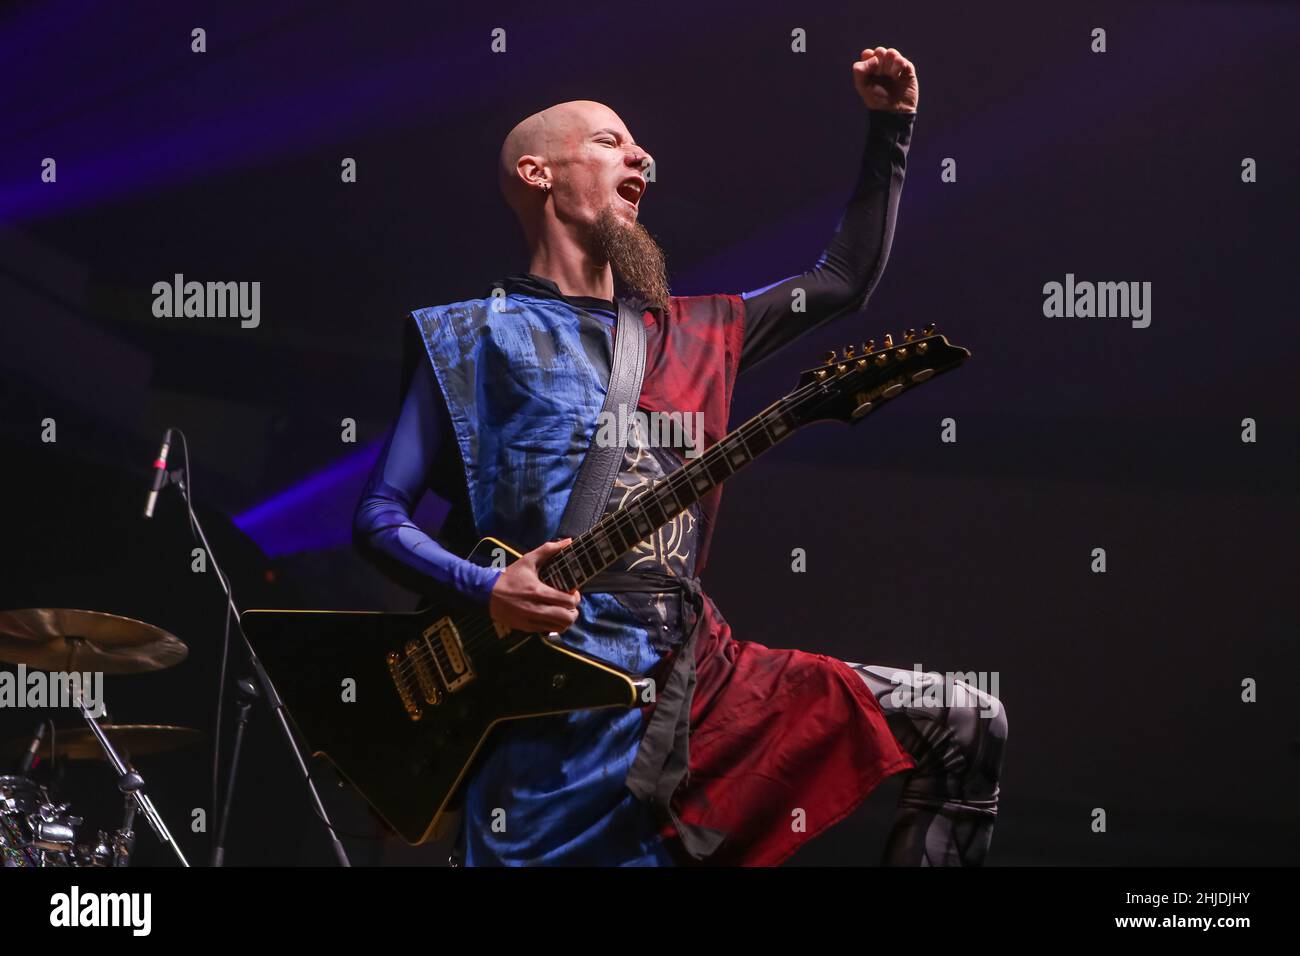 Gloryhammer, British symphonic power metal band, self-described as heroic fantasy power metal: Paul Templing aka Ser Proletius (guitar). Concert at Wartenberg Oval in Wartenberg-Angersbach near Fulda, Germany, 18th Jan, 2017, as support for band Hammerfall, Built To Tour 2017. Stock Photo